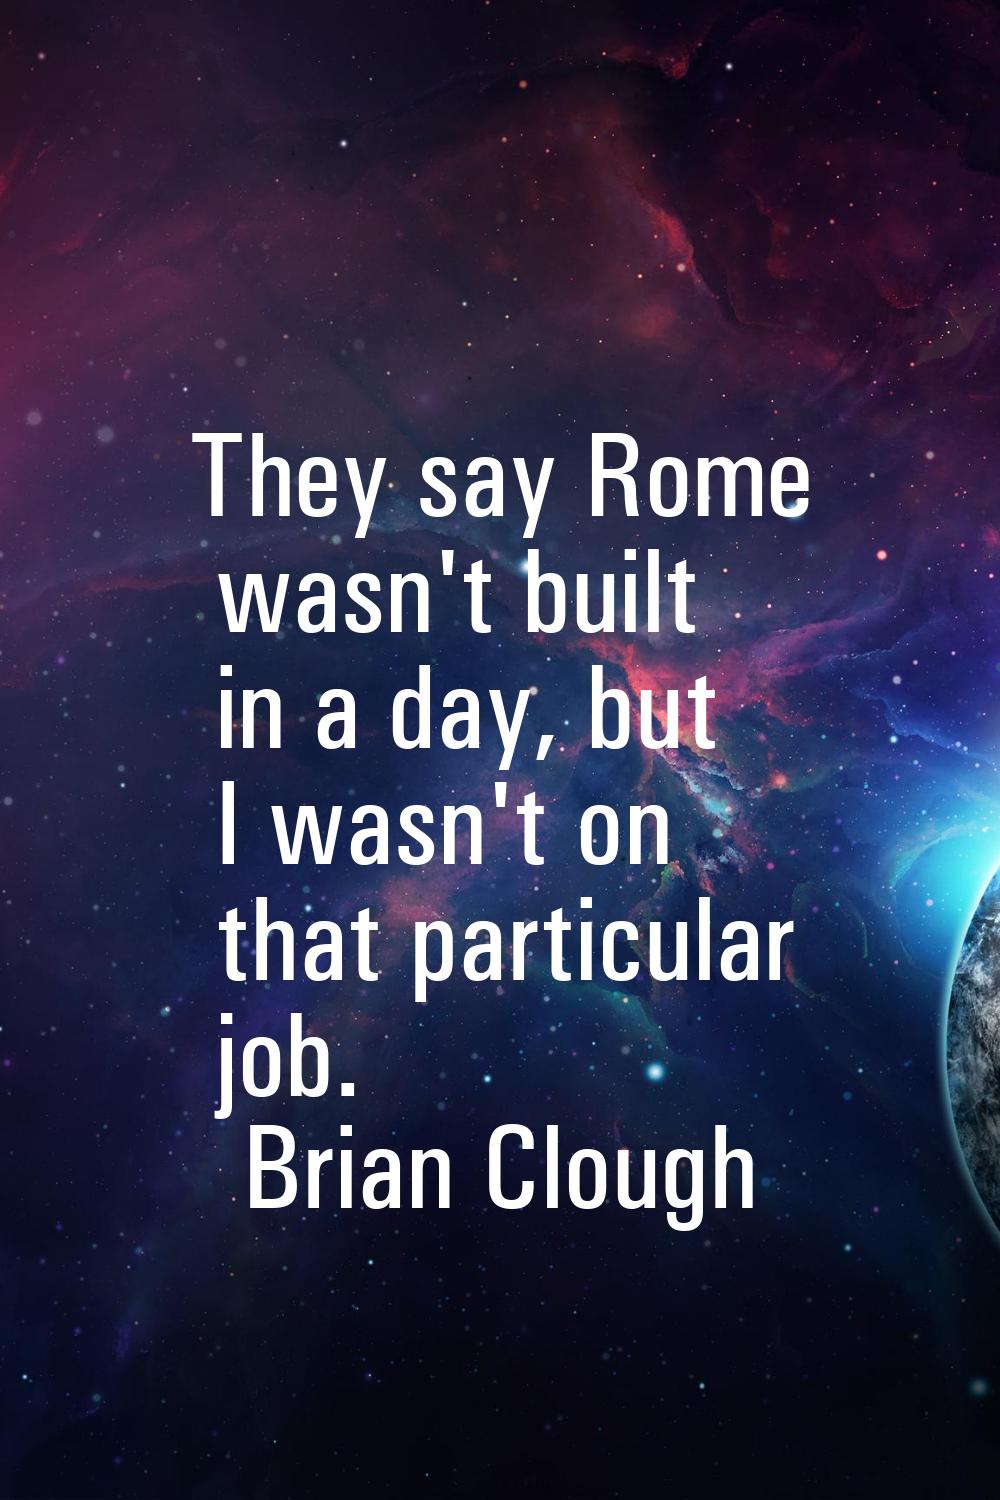 They say Rome wasn't built in a day, but I wasn't on that particular job.